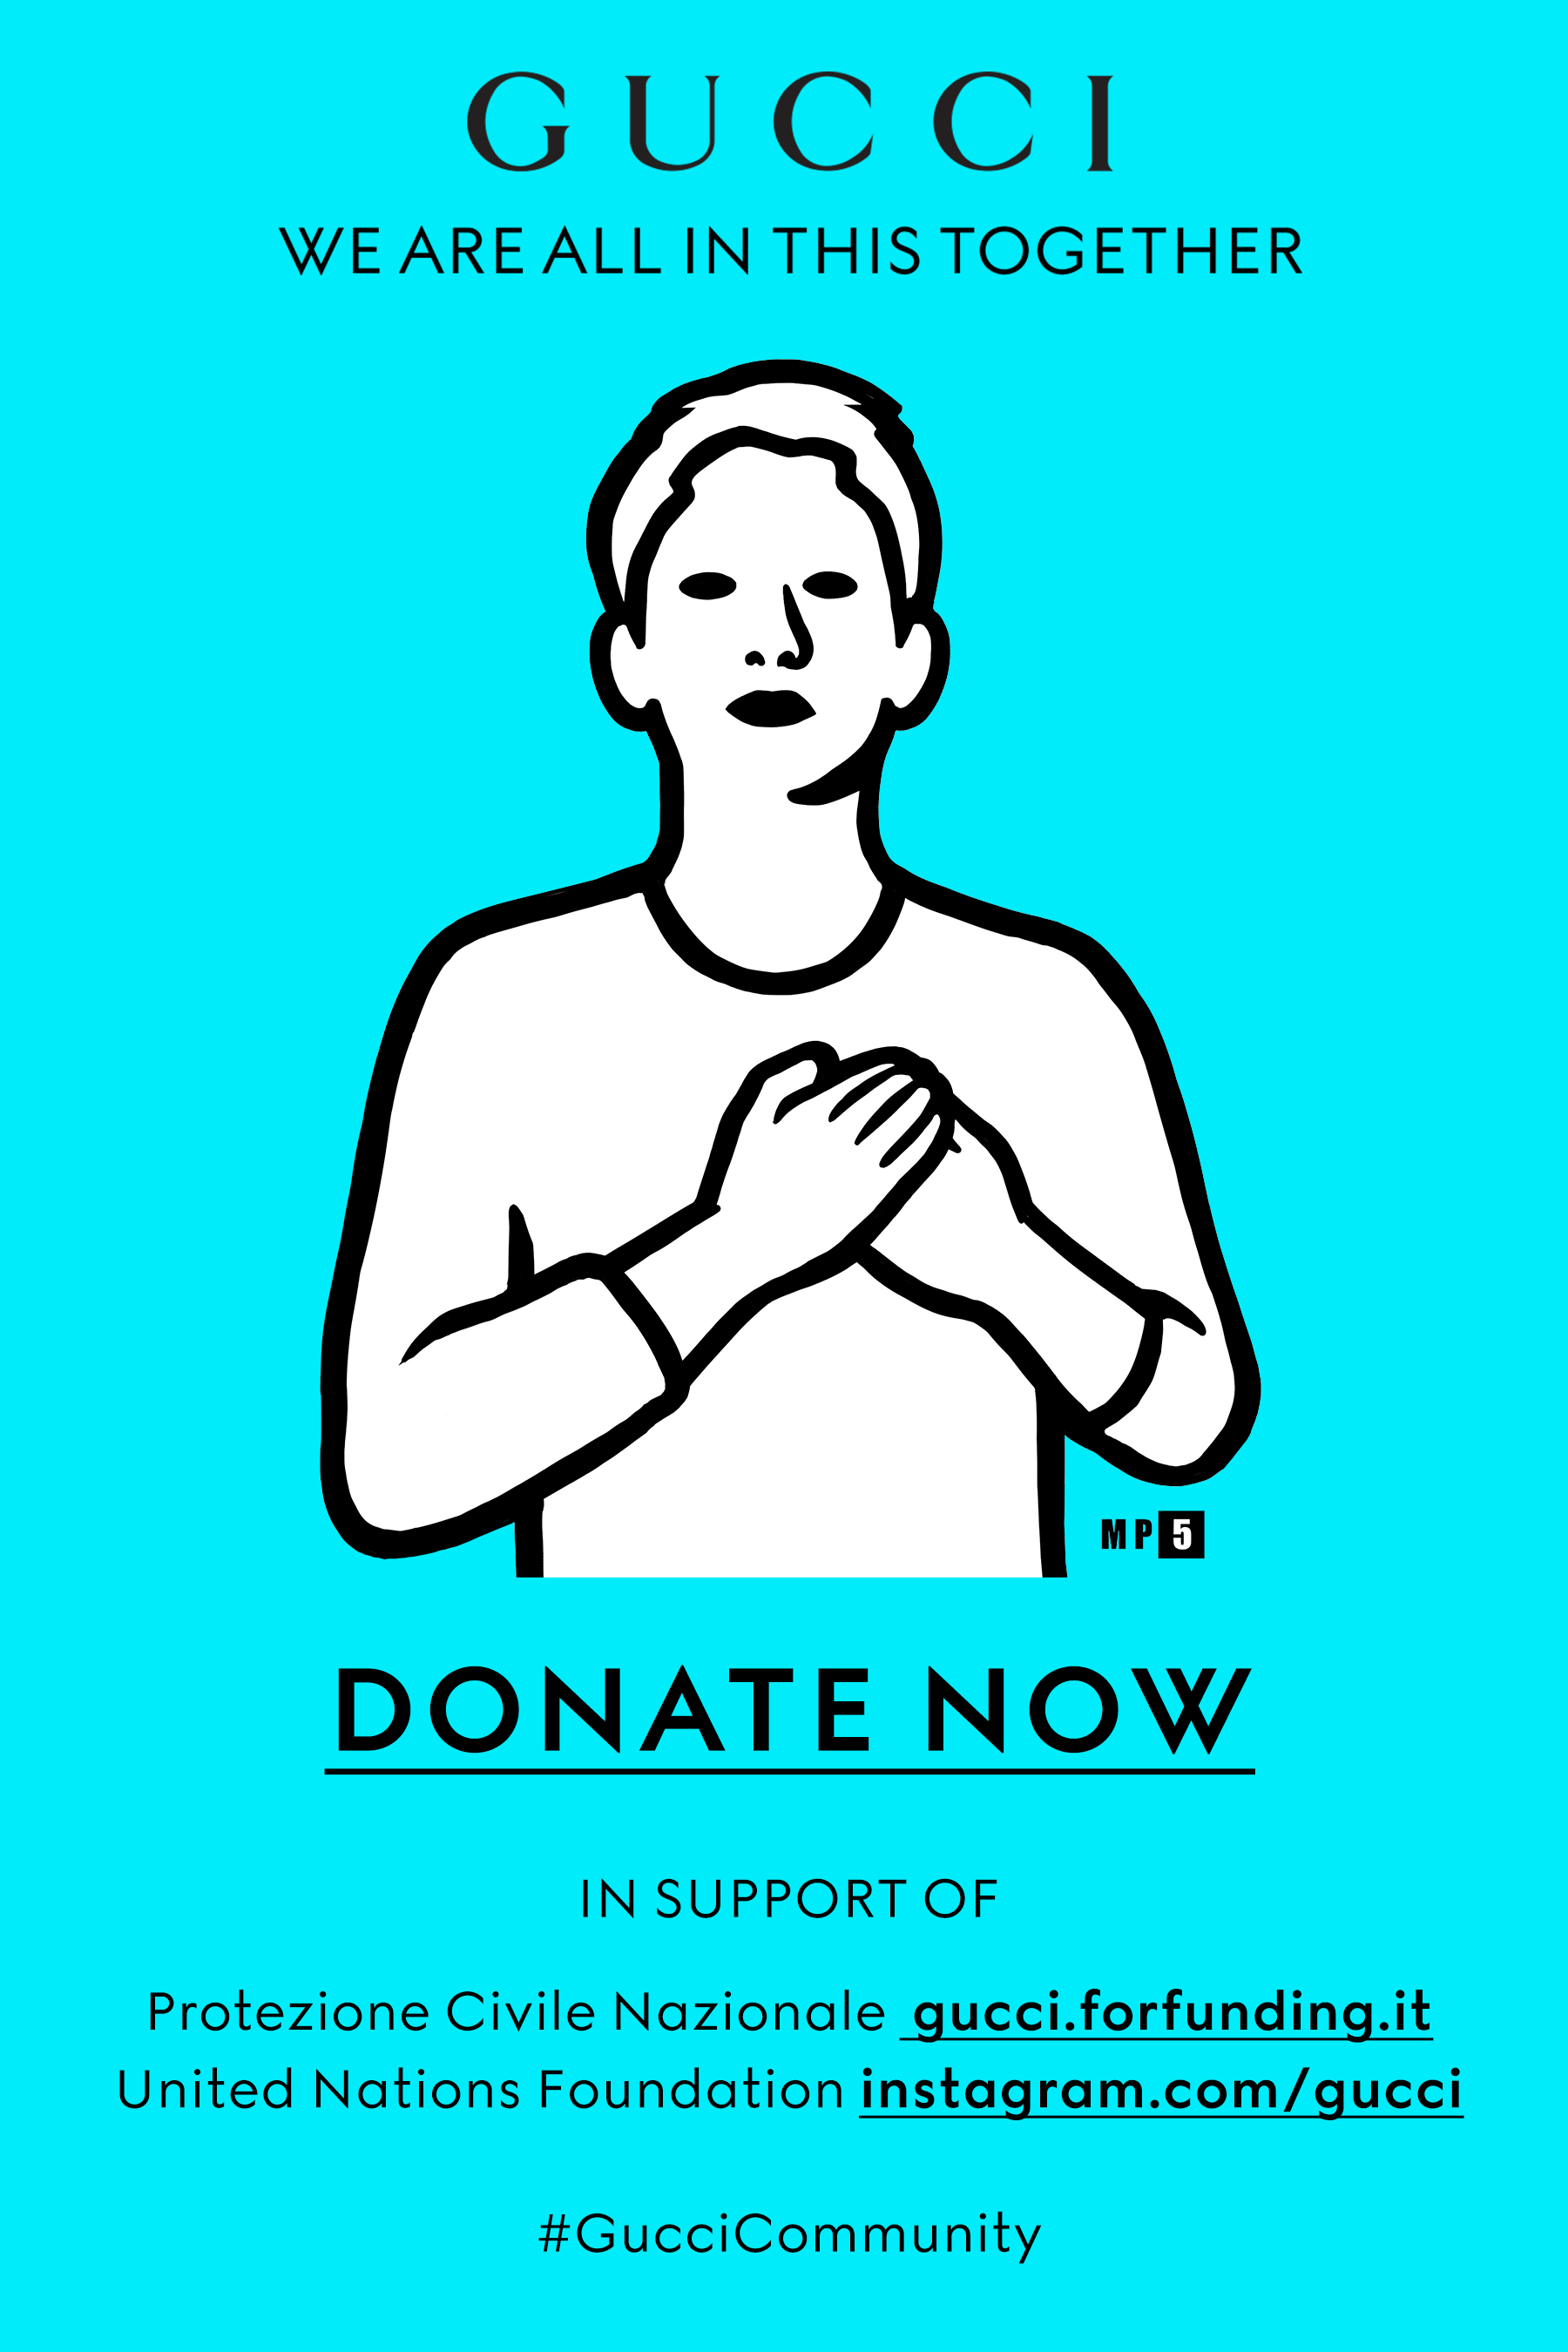  “We Are All In This Together” is the call to action that will accompany Gucci’s crowdfunding campaign along with an illustration gifted by Rome-based artist MP5, depicting a person holding their hand to their heart in a symbol of solidarity. 